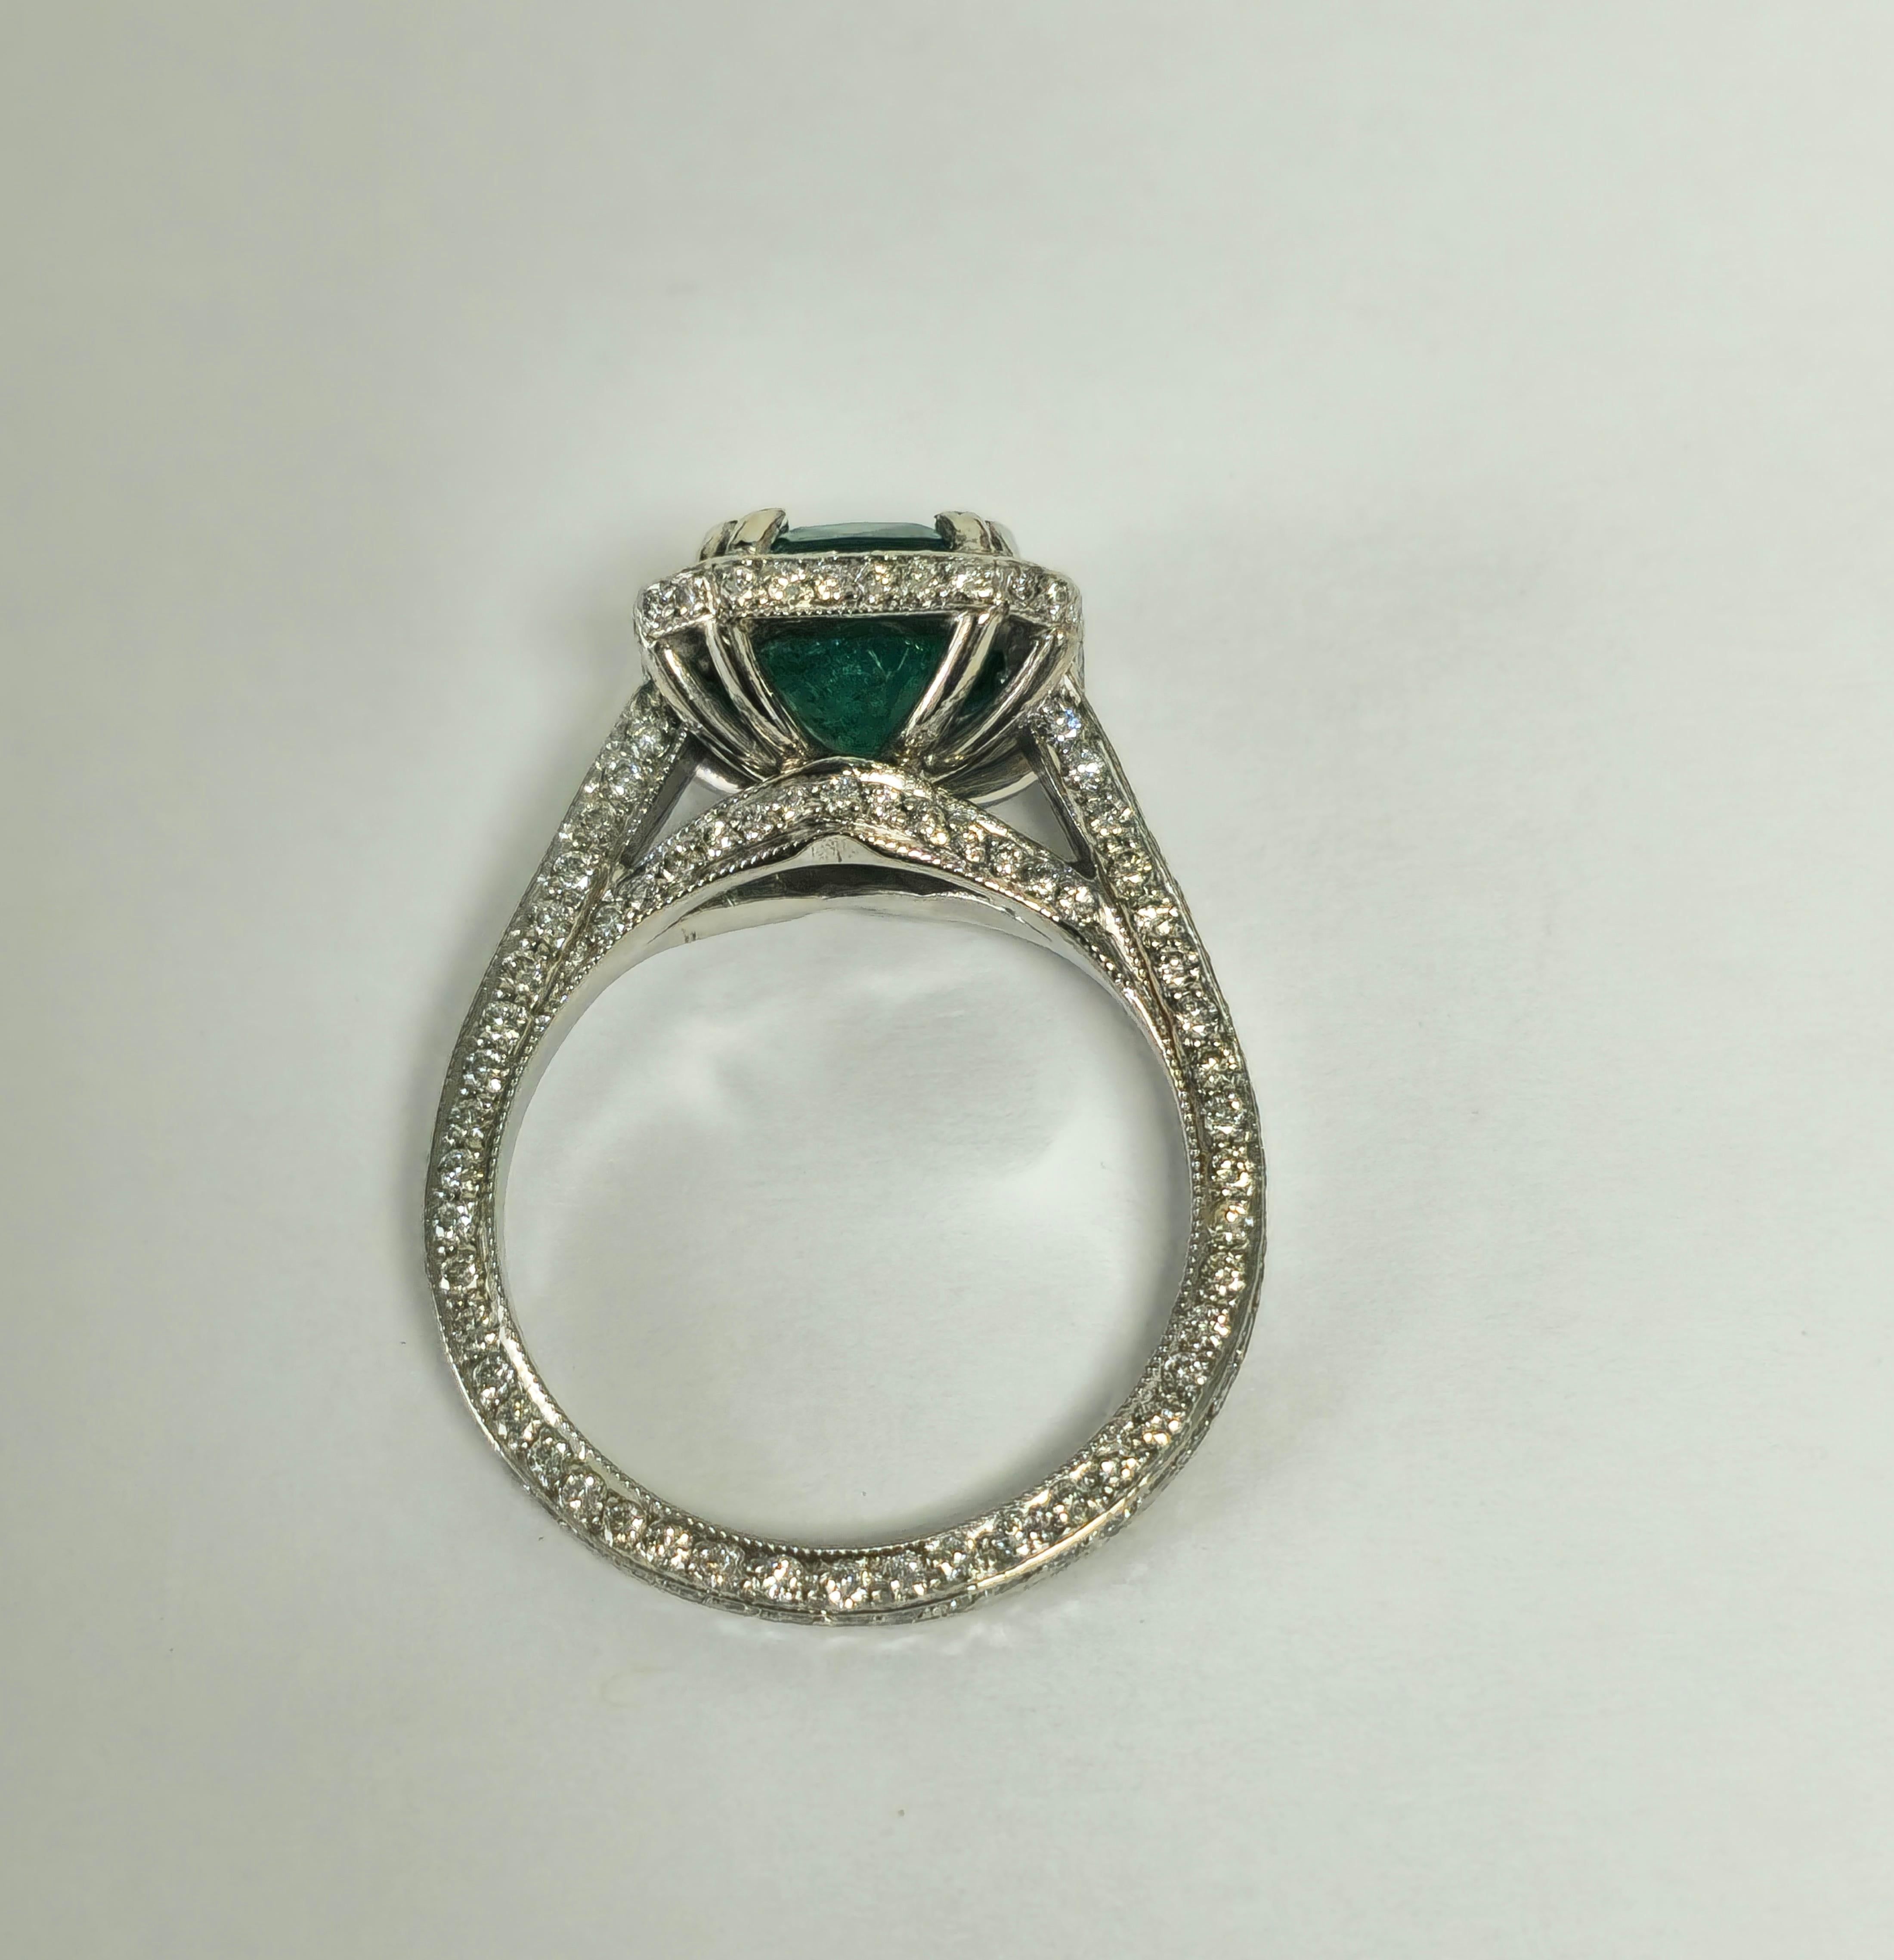 RARE 4ct Natural Emerald & Diamond Engagement Ring in Platinum In Excellent Condition For Sale In Miami, FL